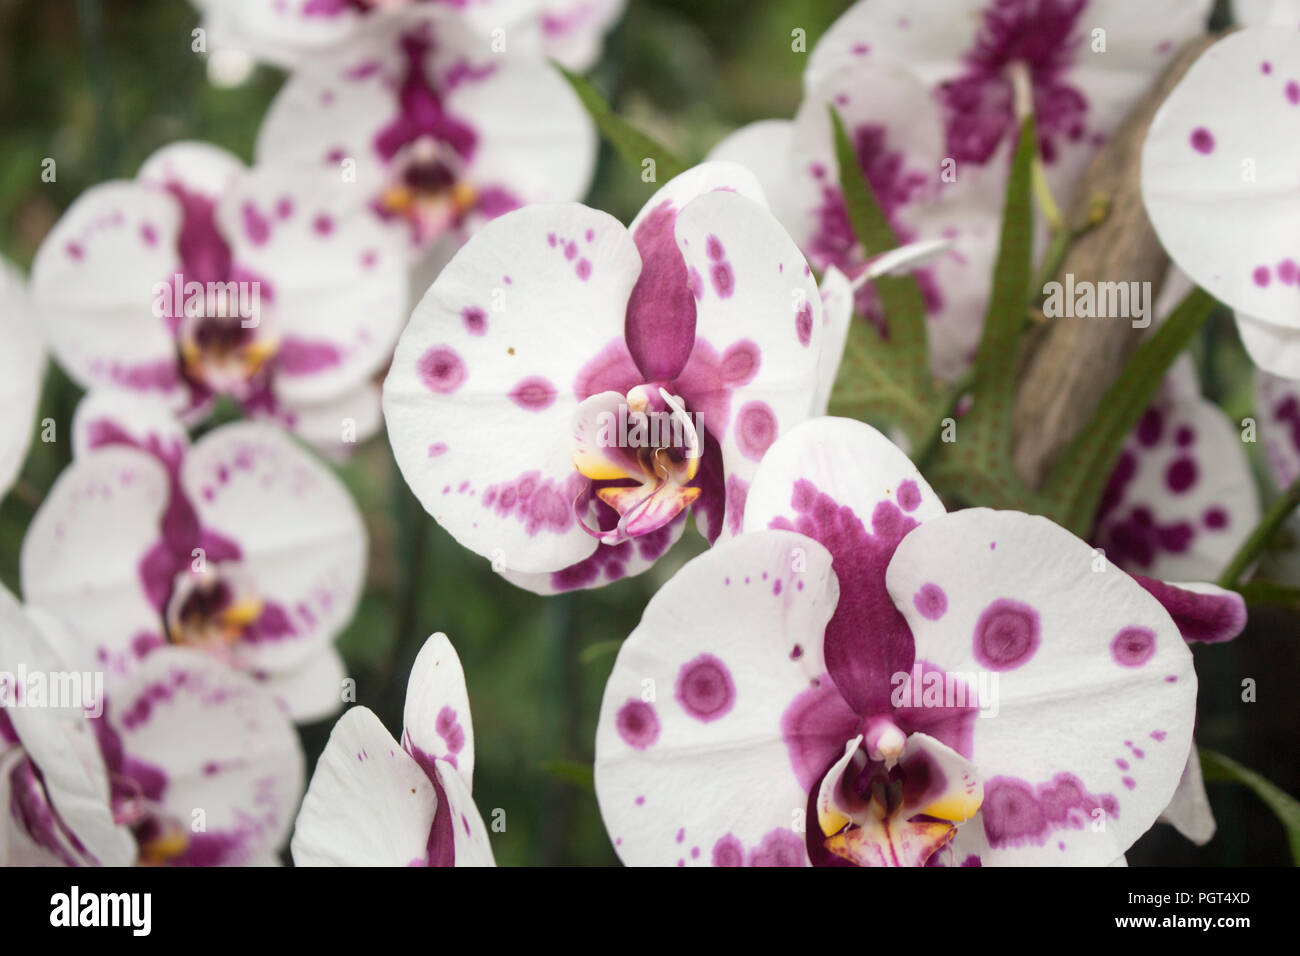 Horizontal close up photo of perfect pink polka dot orchids. Also known as Phalaenopsis or Moth Orchids. Stock Photo